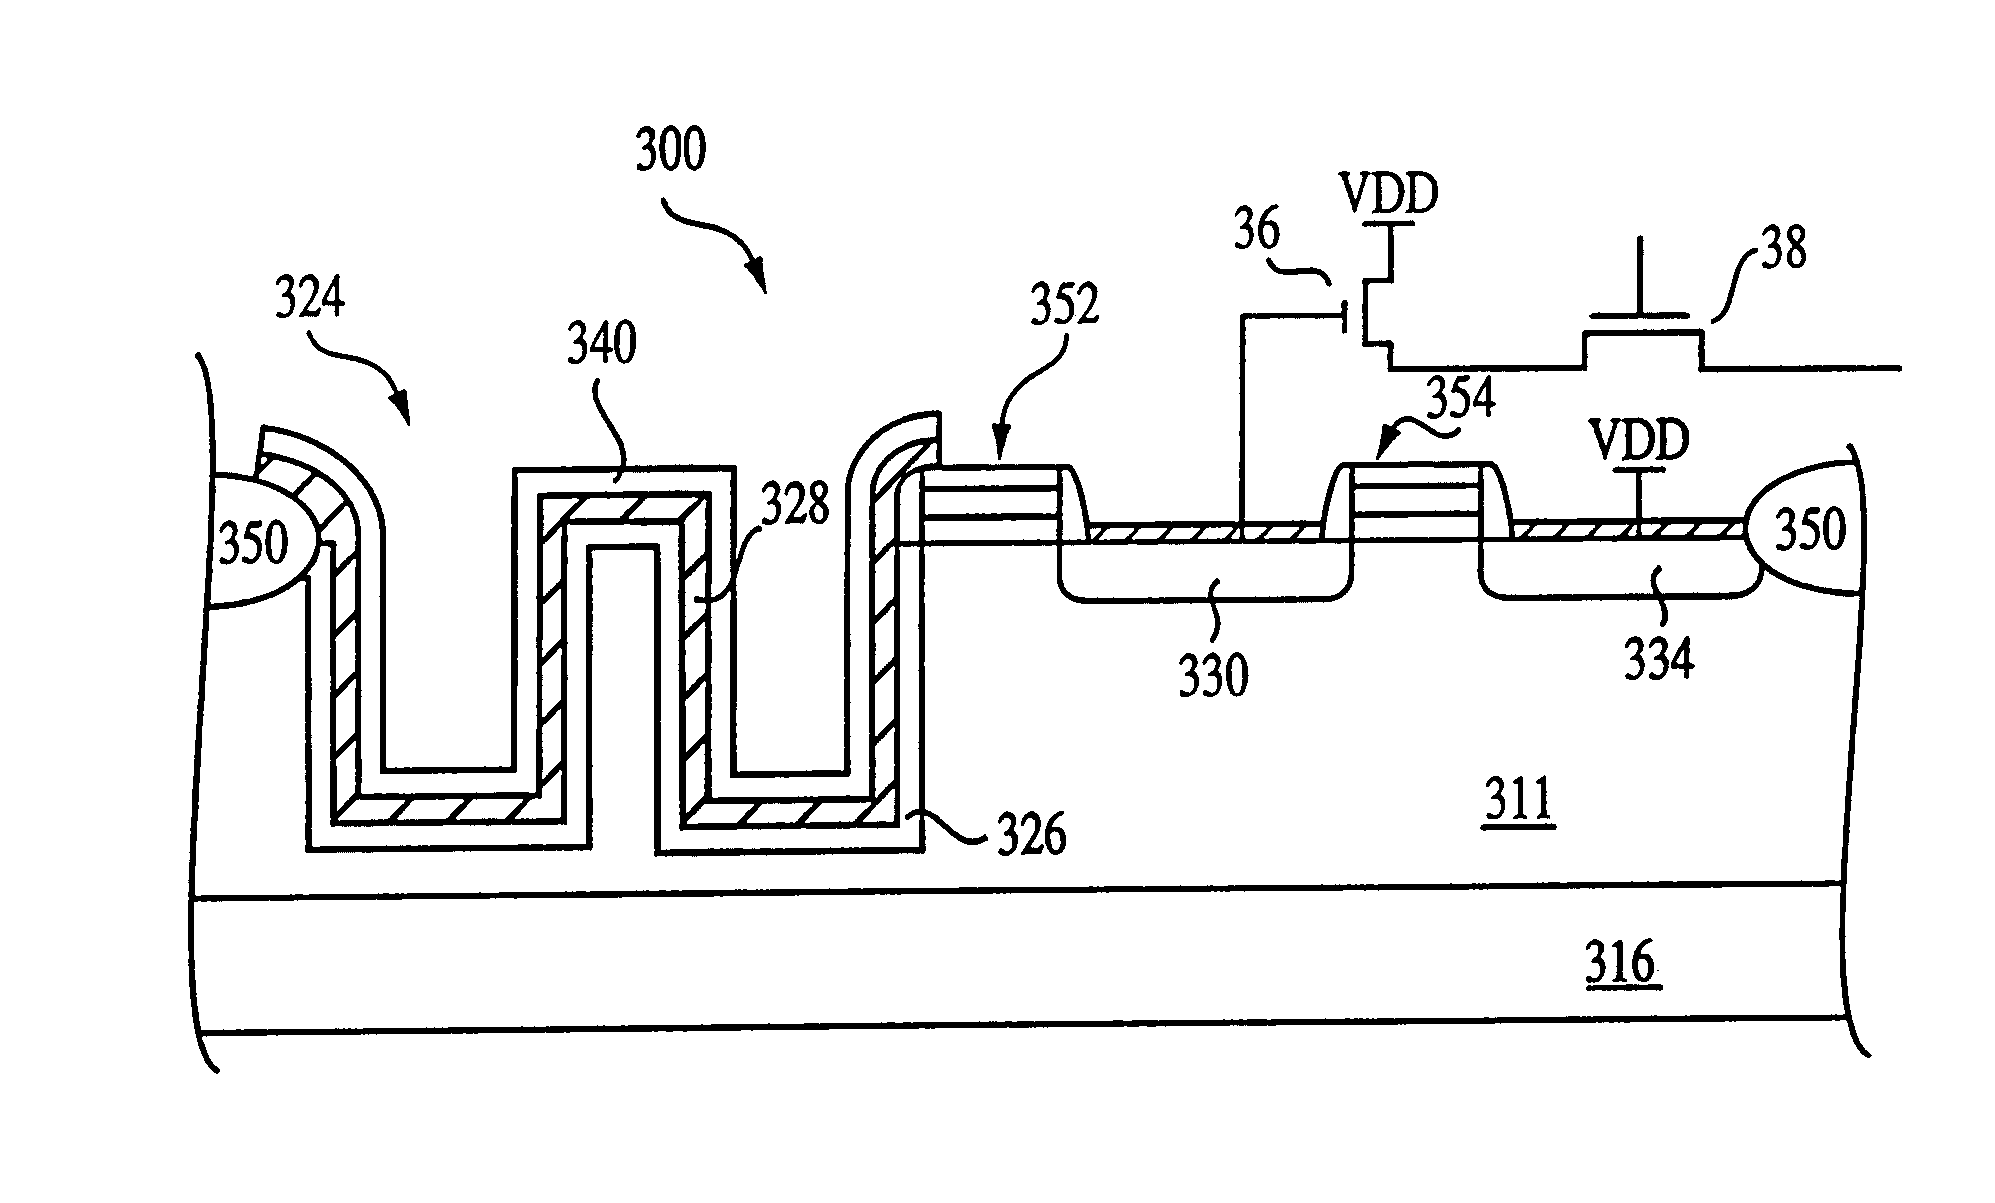 Photodiode sensor and pixel sensor cell for use in an imaging device